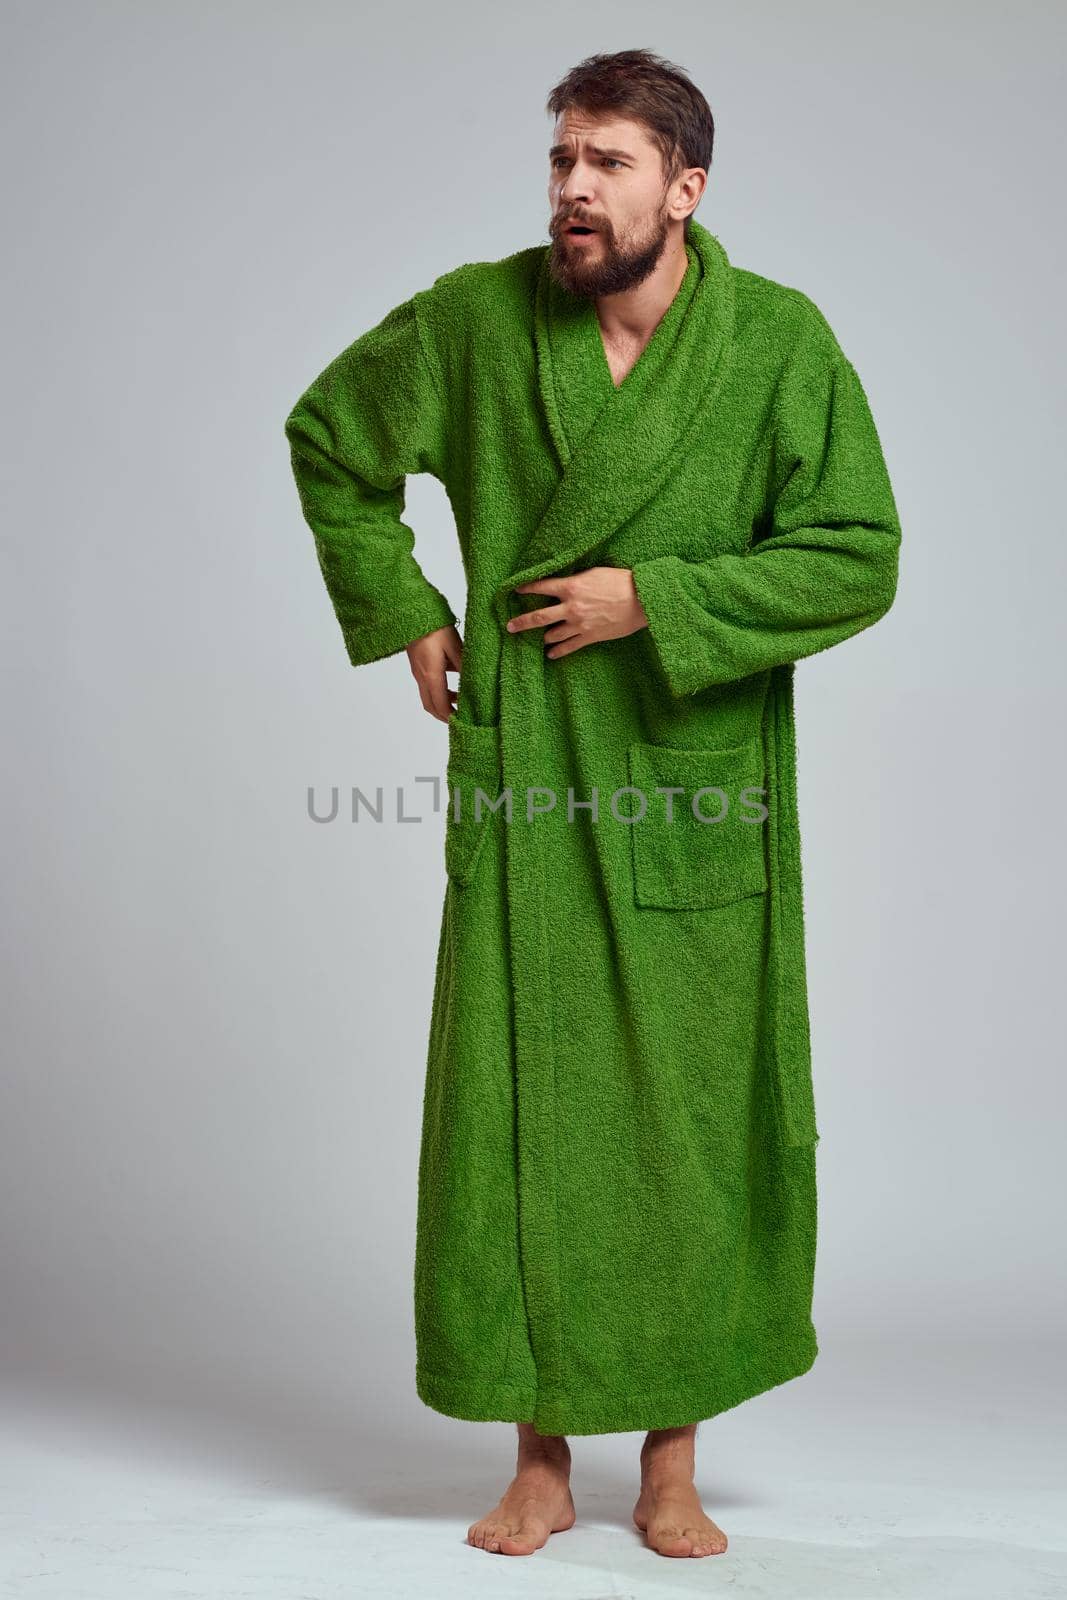 A bearded man in a green robe resting Comfort morning. High quality photo